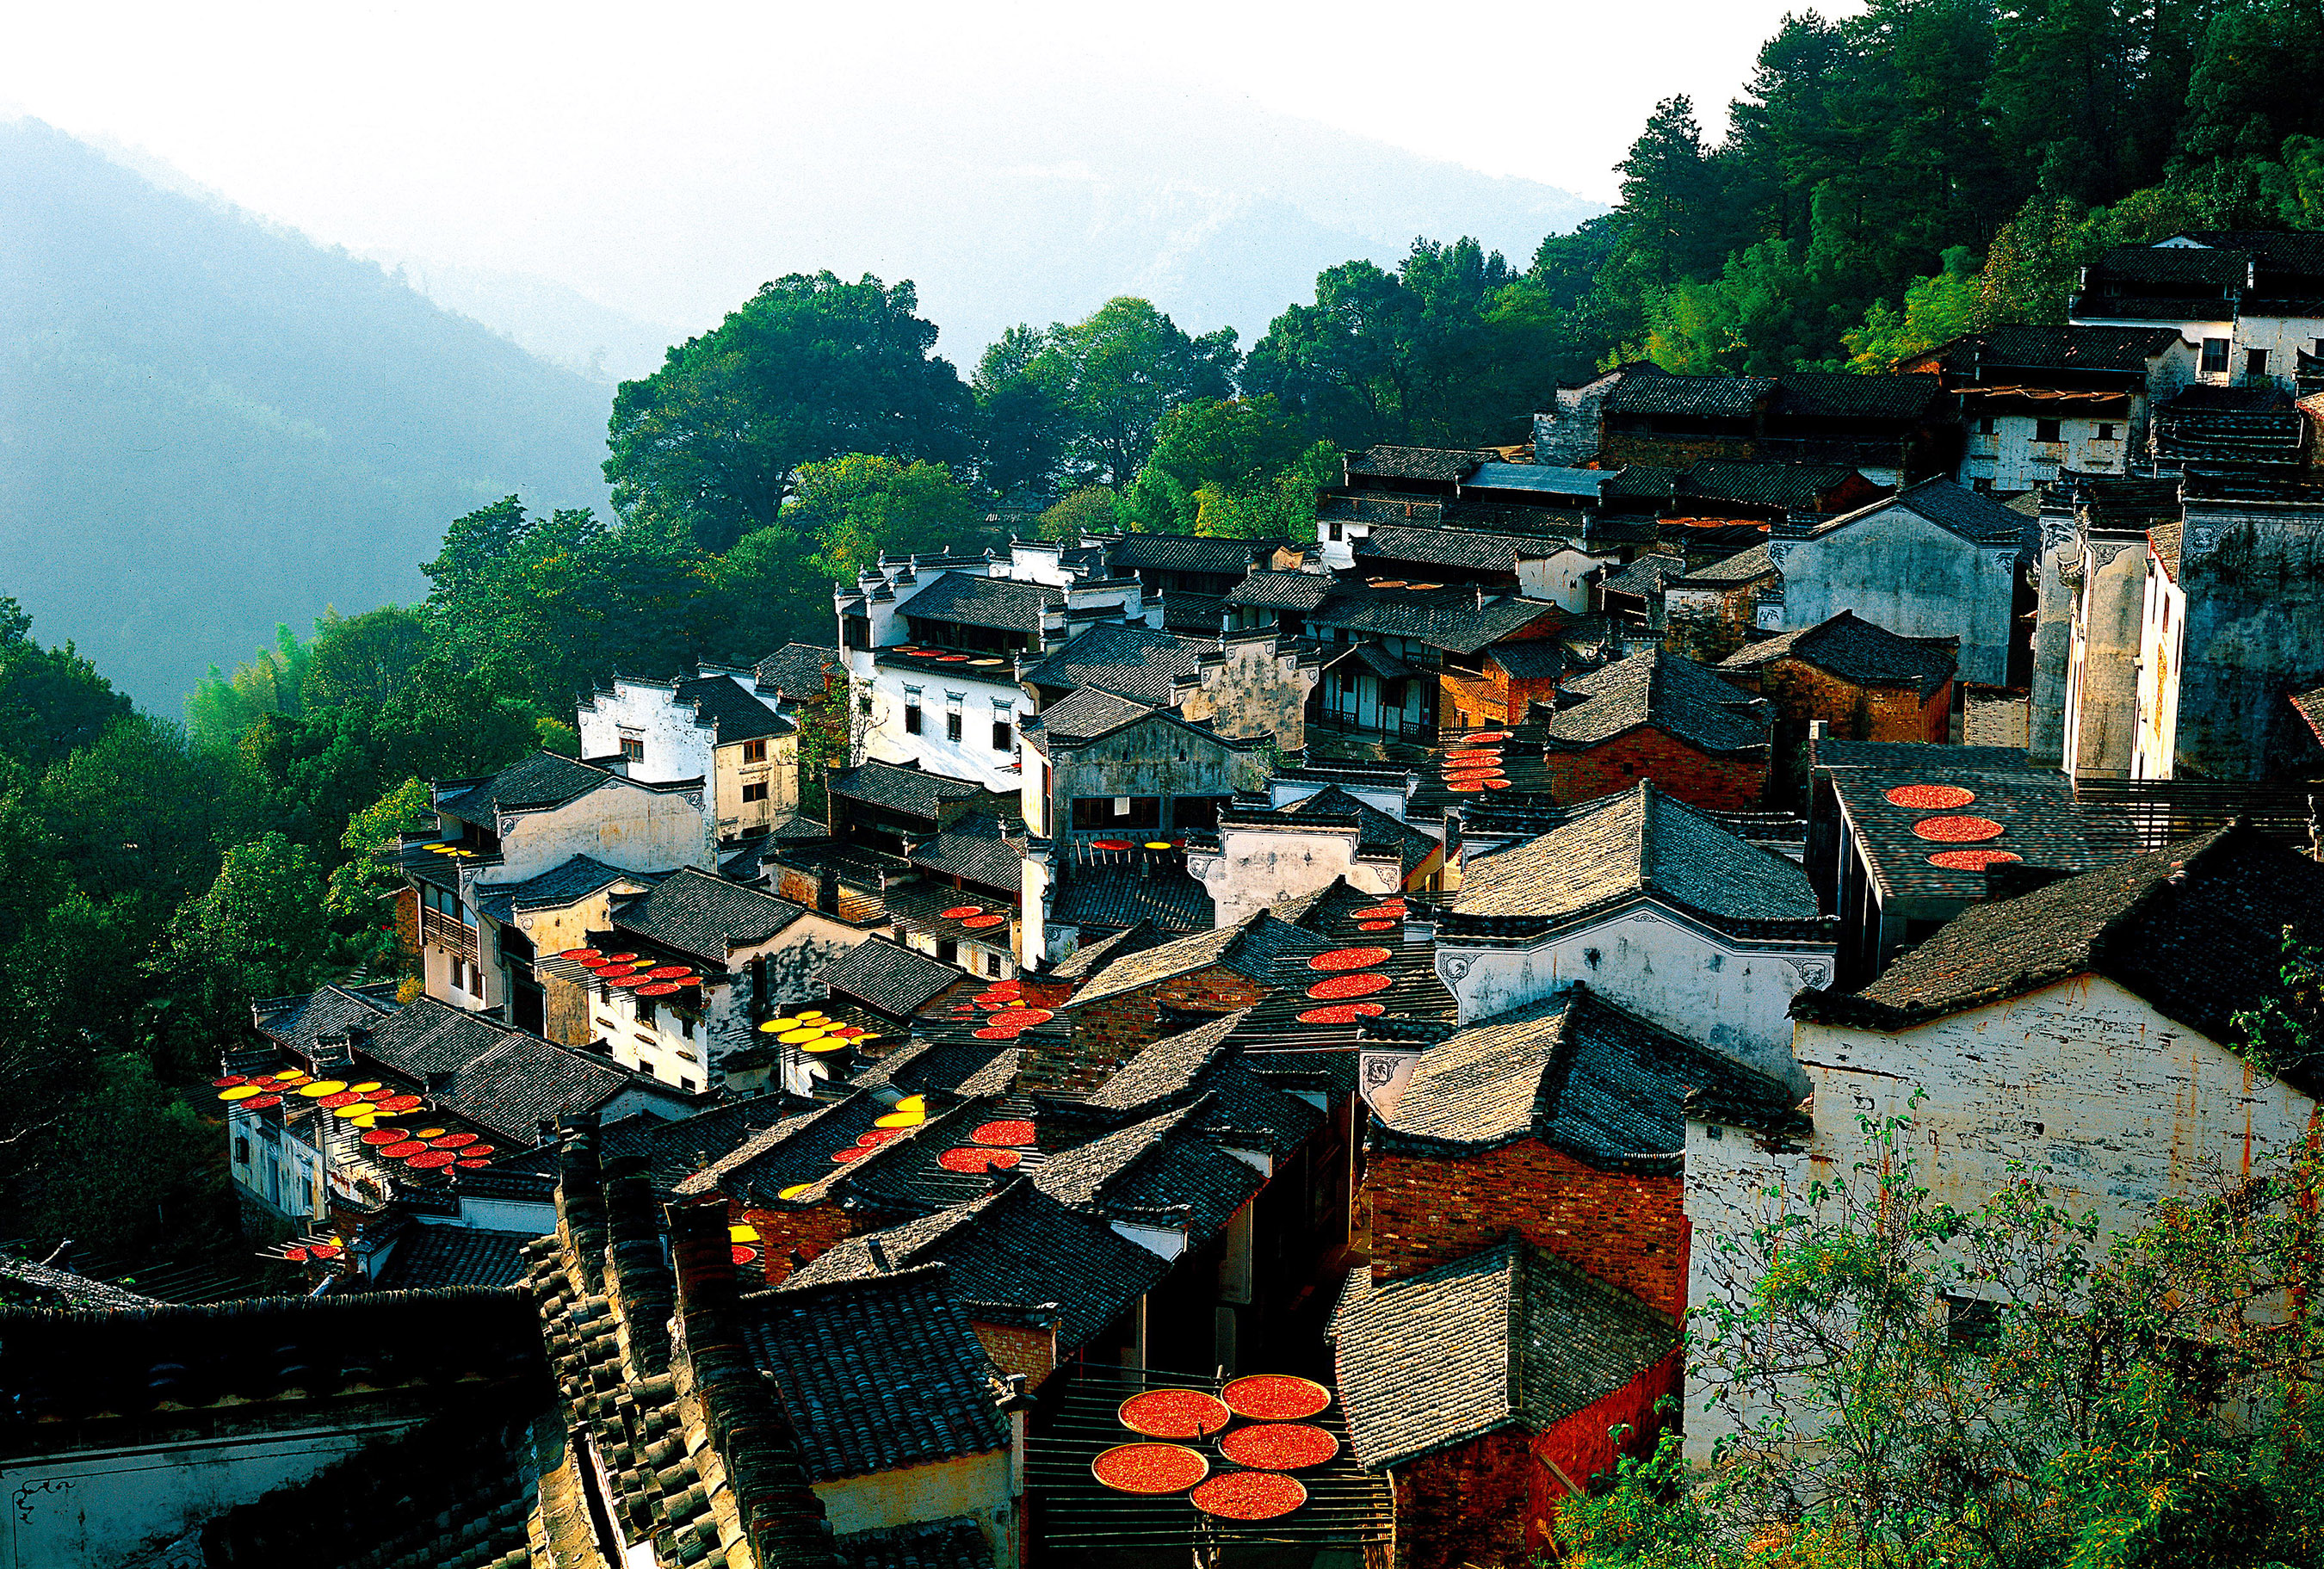 Huangling village has preserved and maintained the ancient Hui-style architectures with a history of more than 500 years